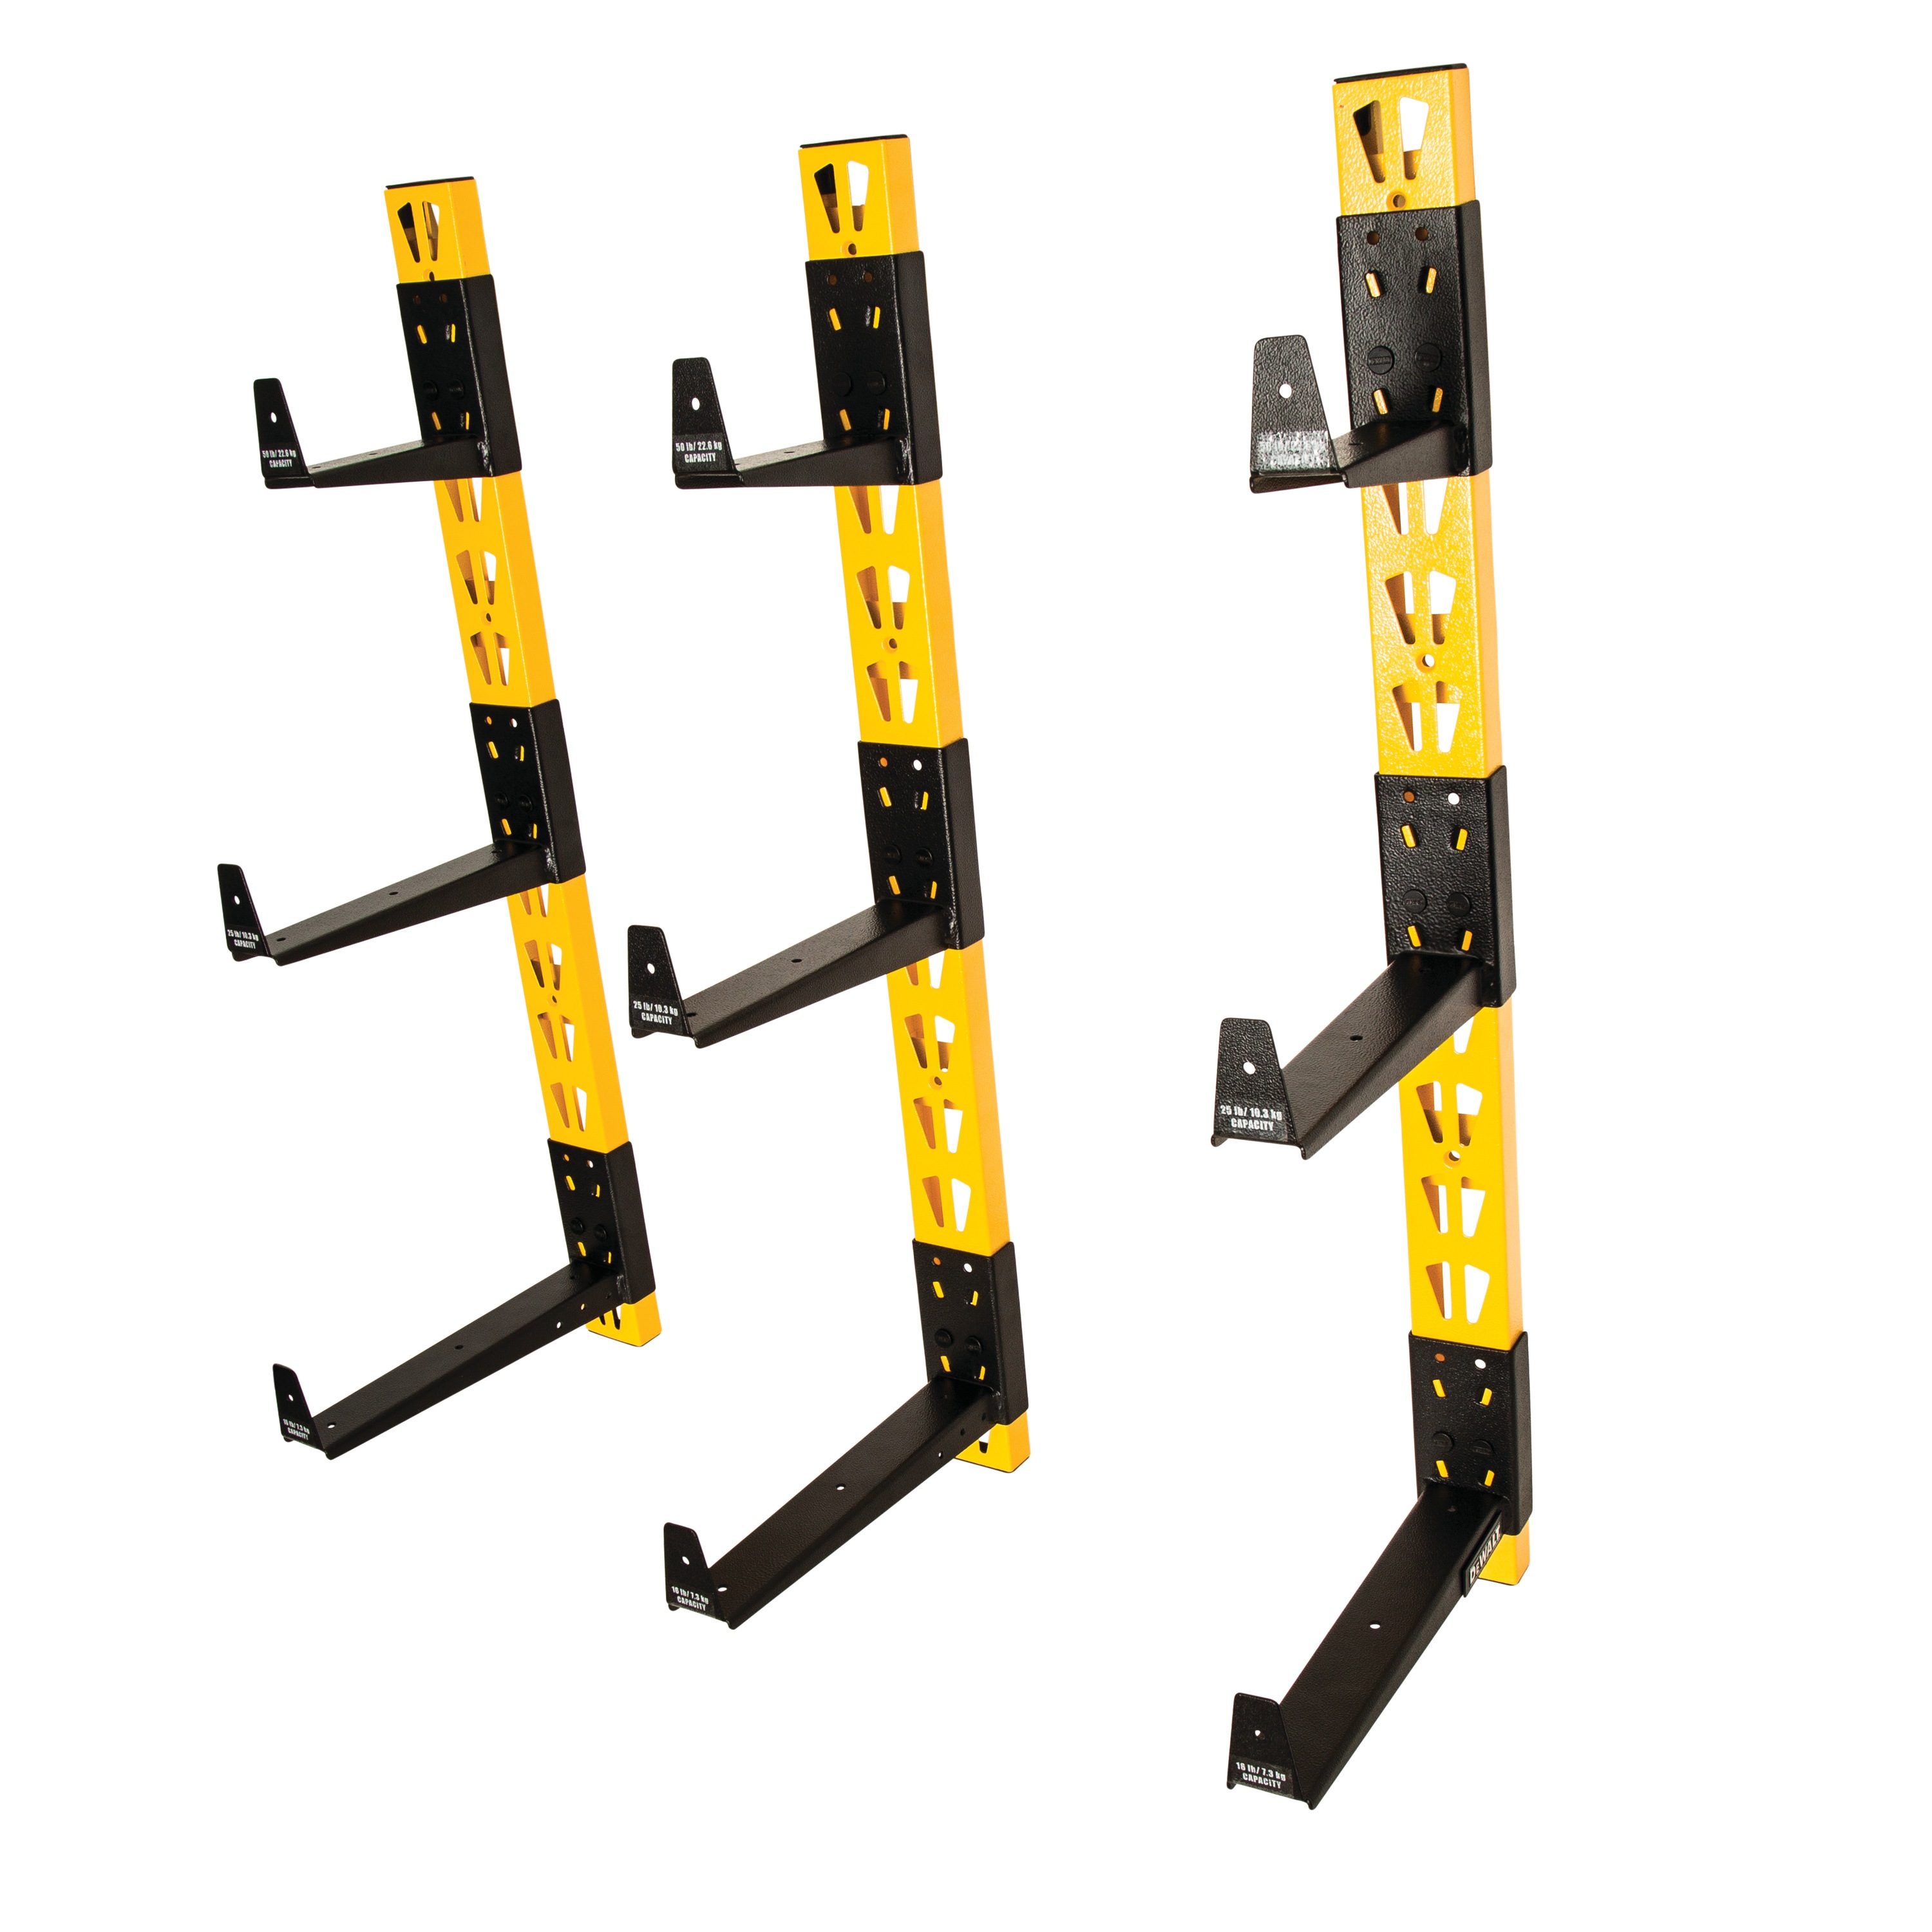 Profile of the 3 piece Wall Mount Cantilever Rack.